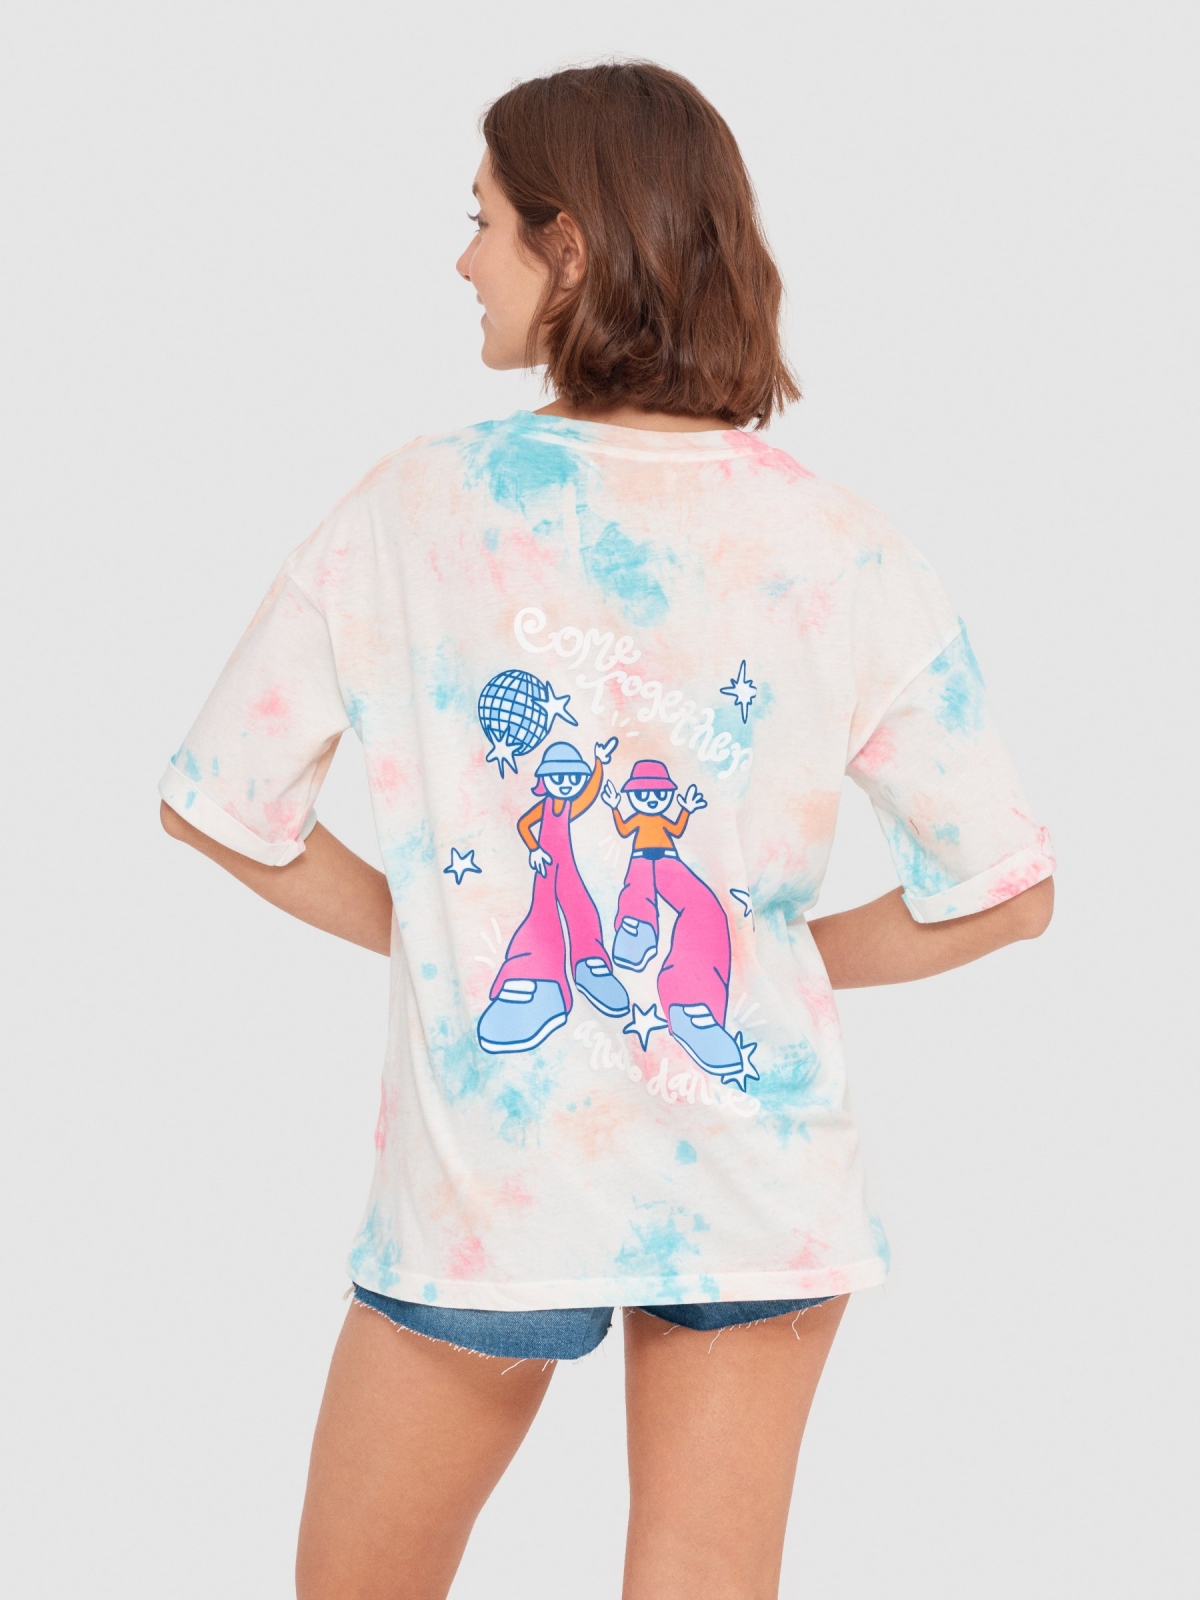 Tie dye disco t-shirt light pink middle back view